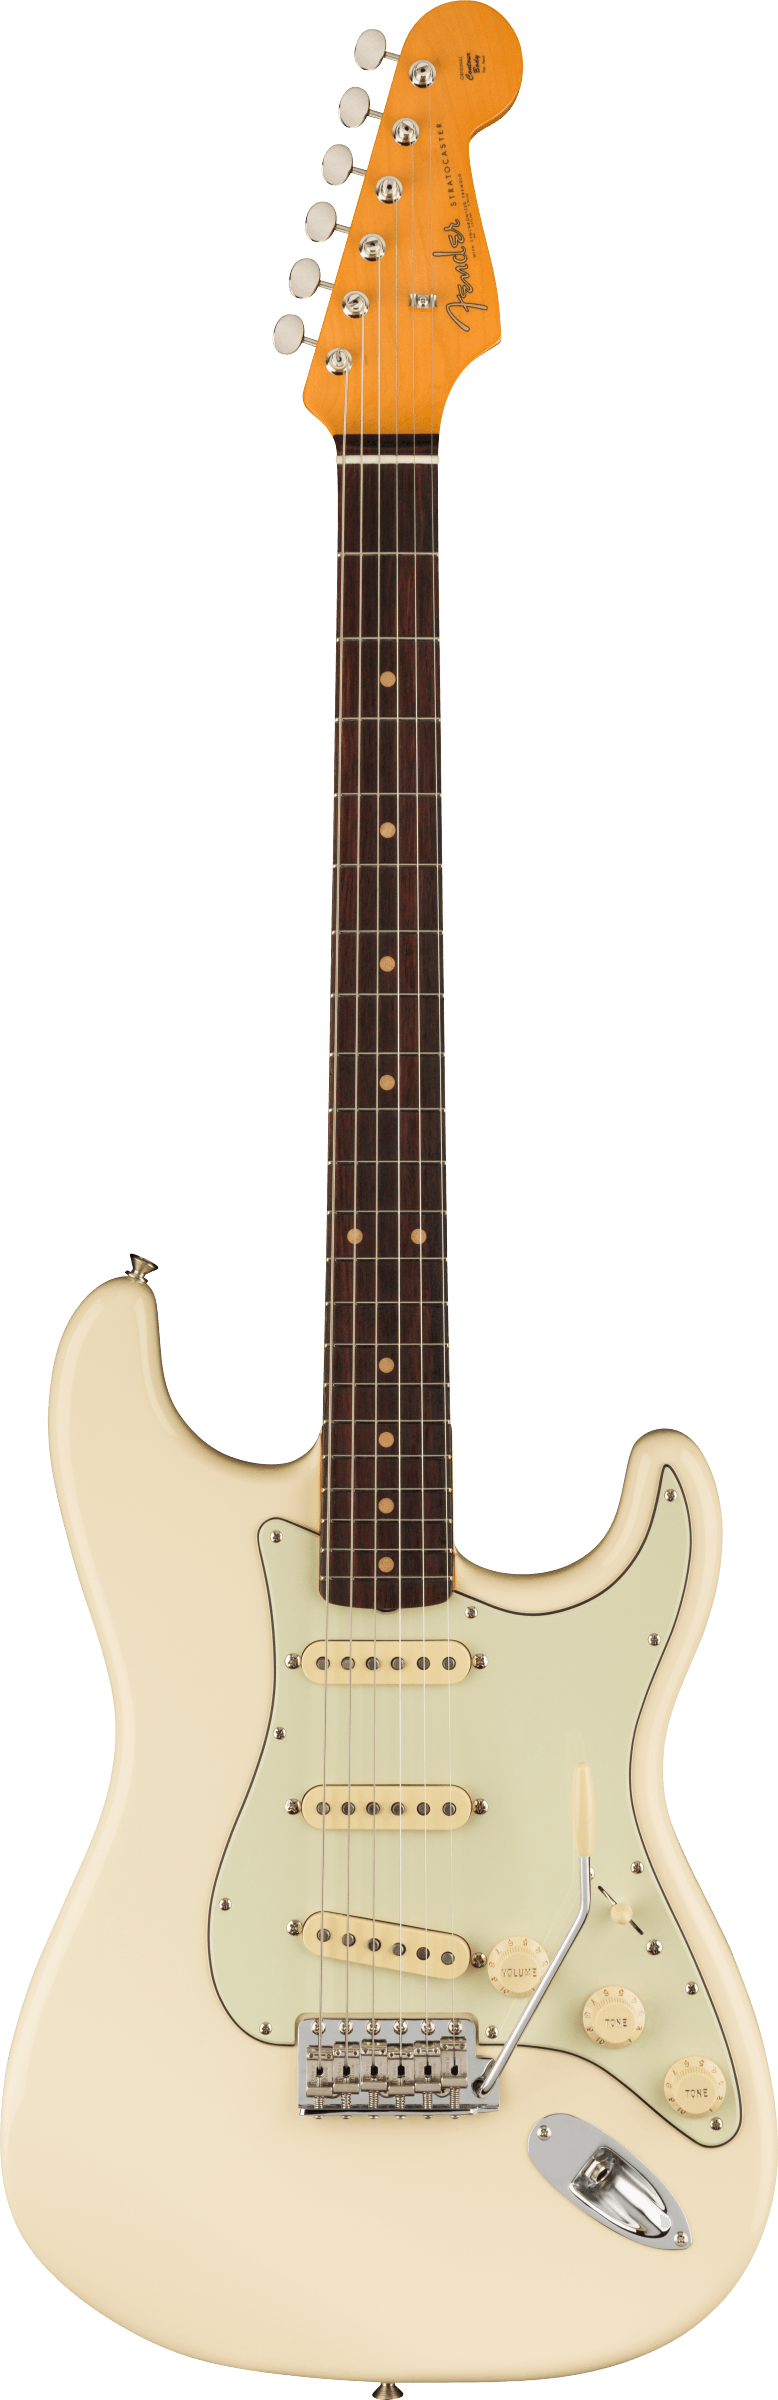 Fender American Vintage II 1961 Stratocaster Electric Guitar - Rw - Olympic White - Joondalup Music Centre